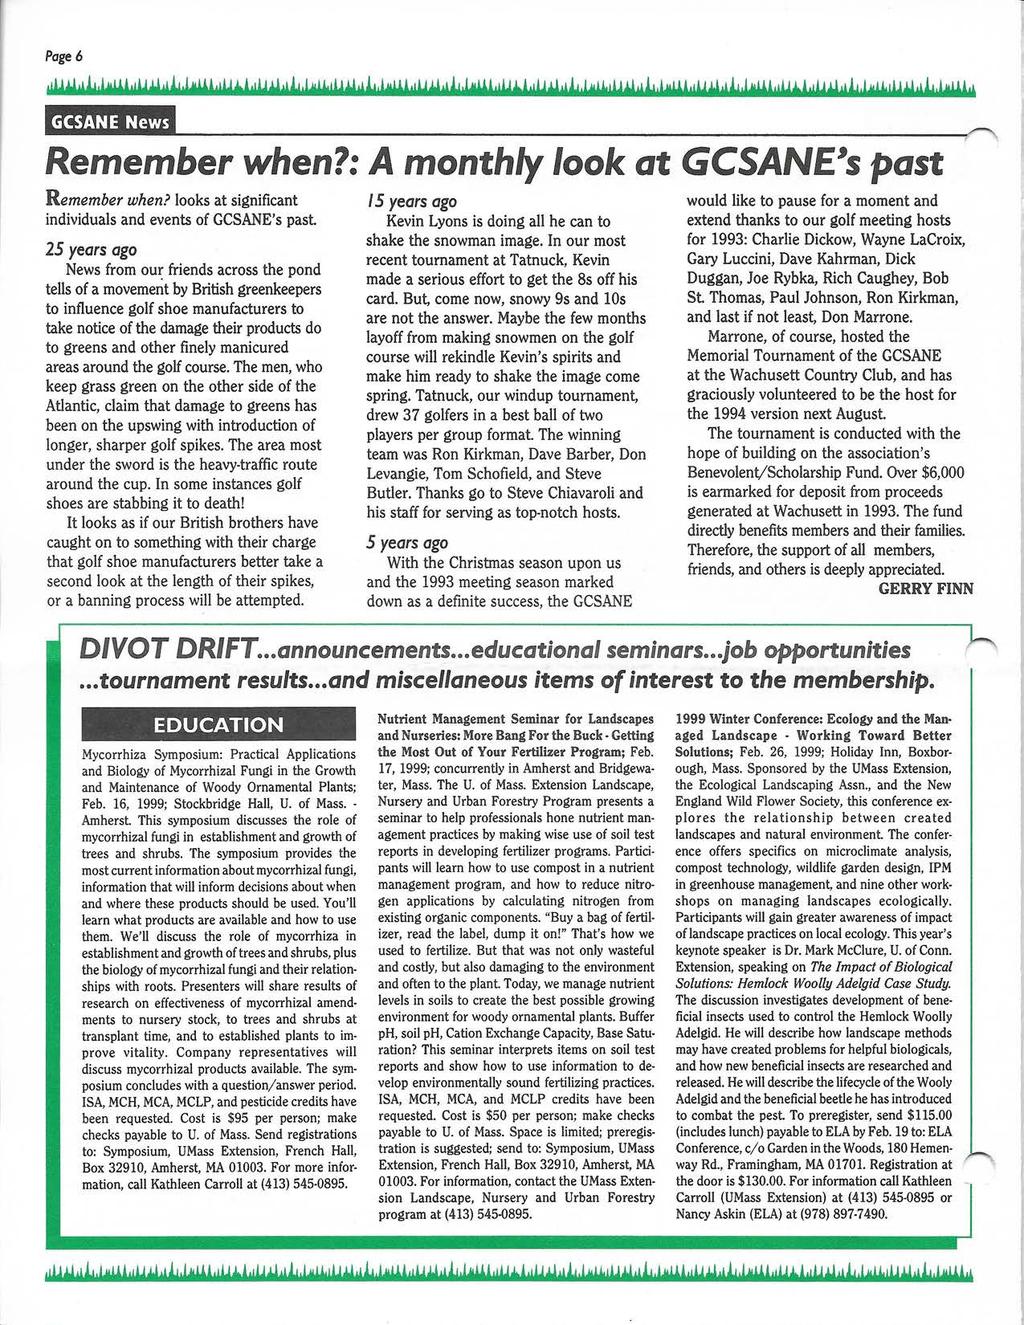 Page 6 tiuúalímilímúai.lmíkimll GCSANE News Rem&mbet when?: À monthly look at GCSñNE^s pmt Wemember when? looks at significant individuals and events of GCSANE's past.